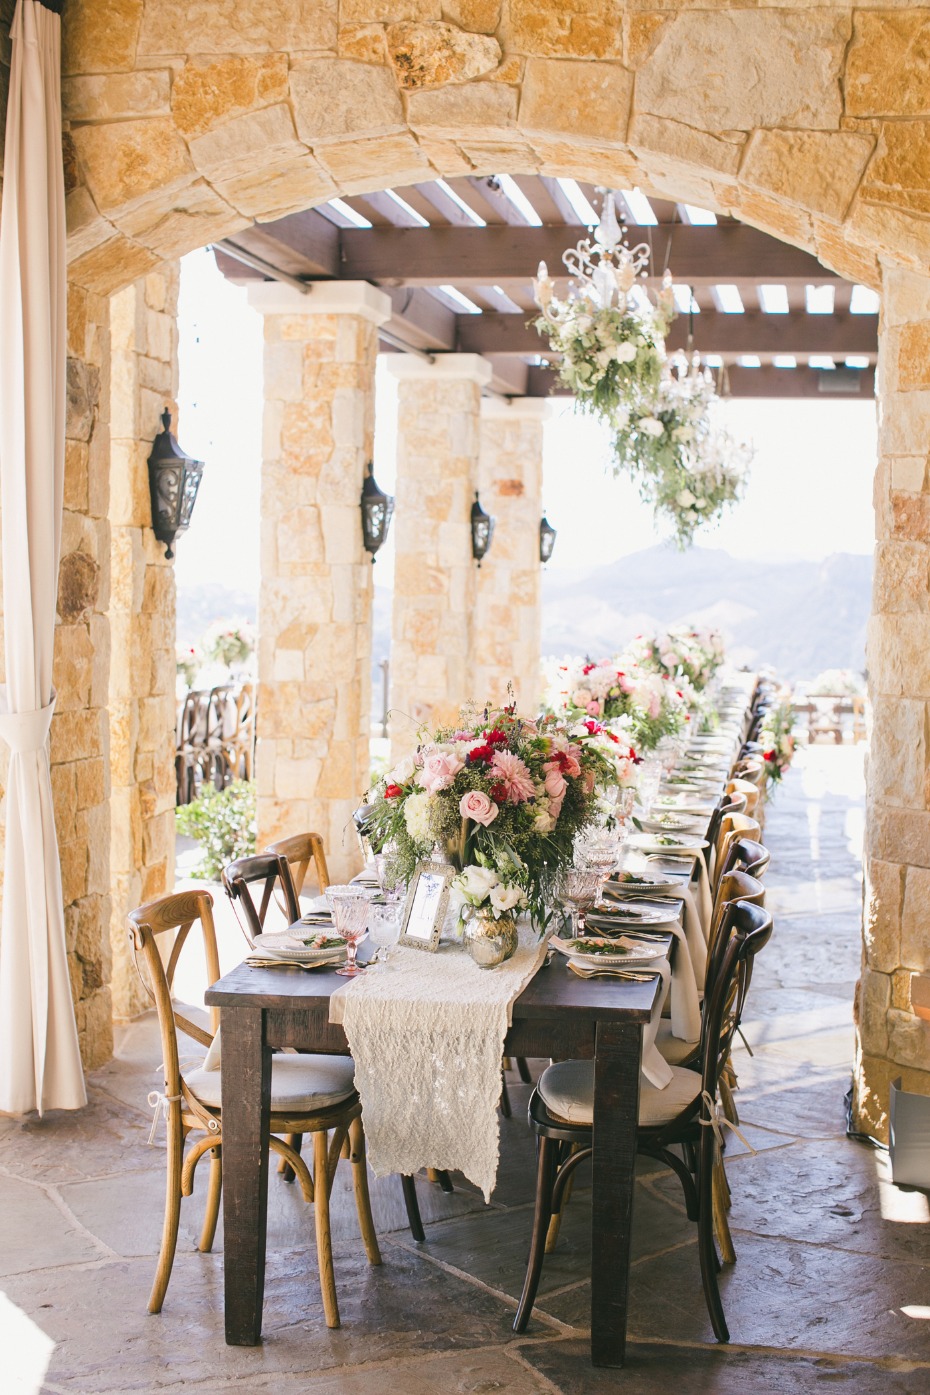 Dreamy tablescape captured by Onelove Photography